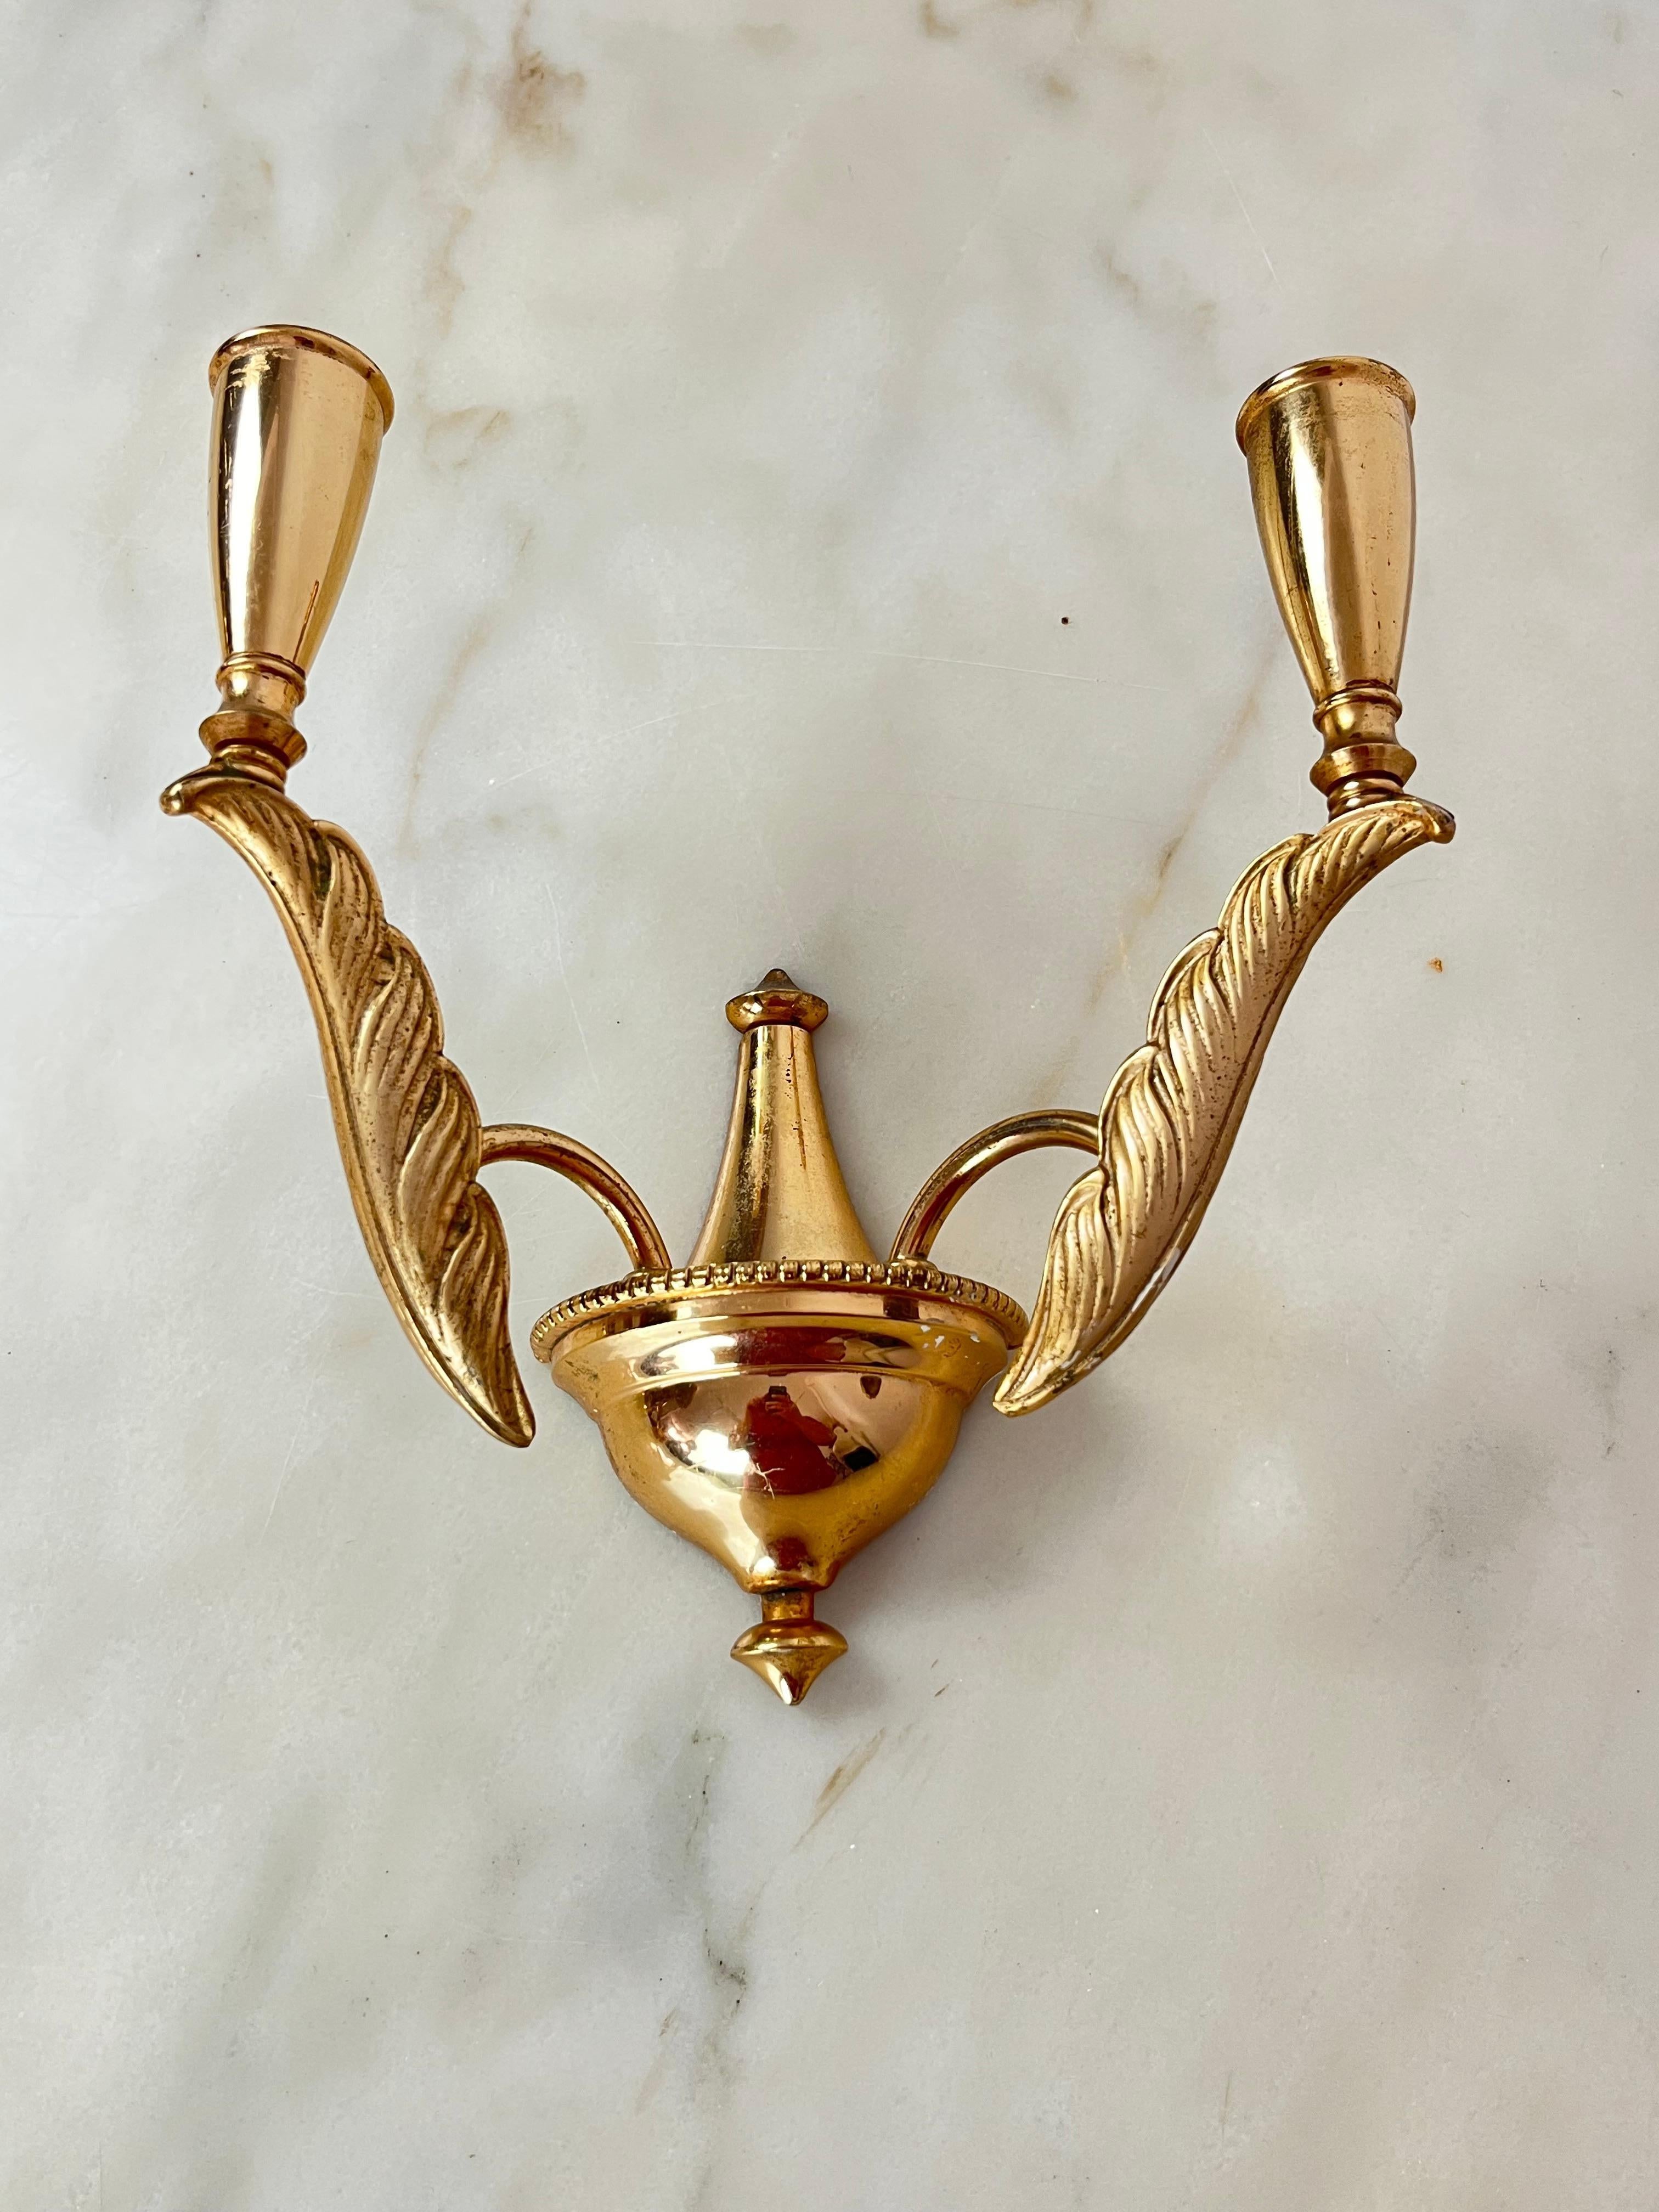 Set of 4 brass sconces, Italy, 1960s.
Intact and functioning, small signs of aging.